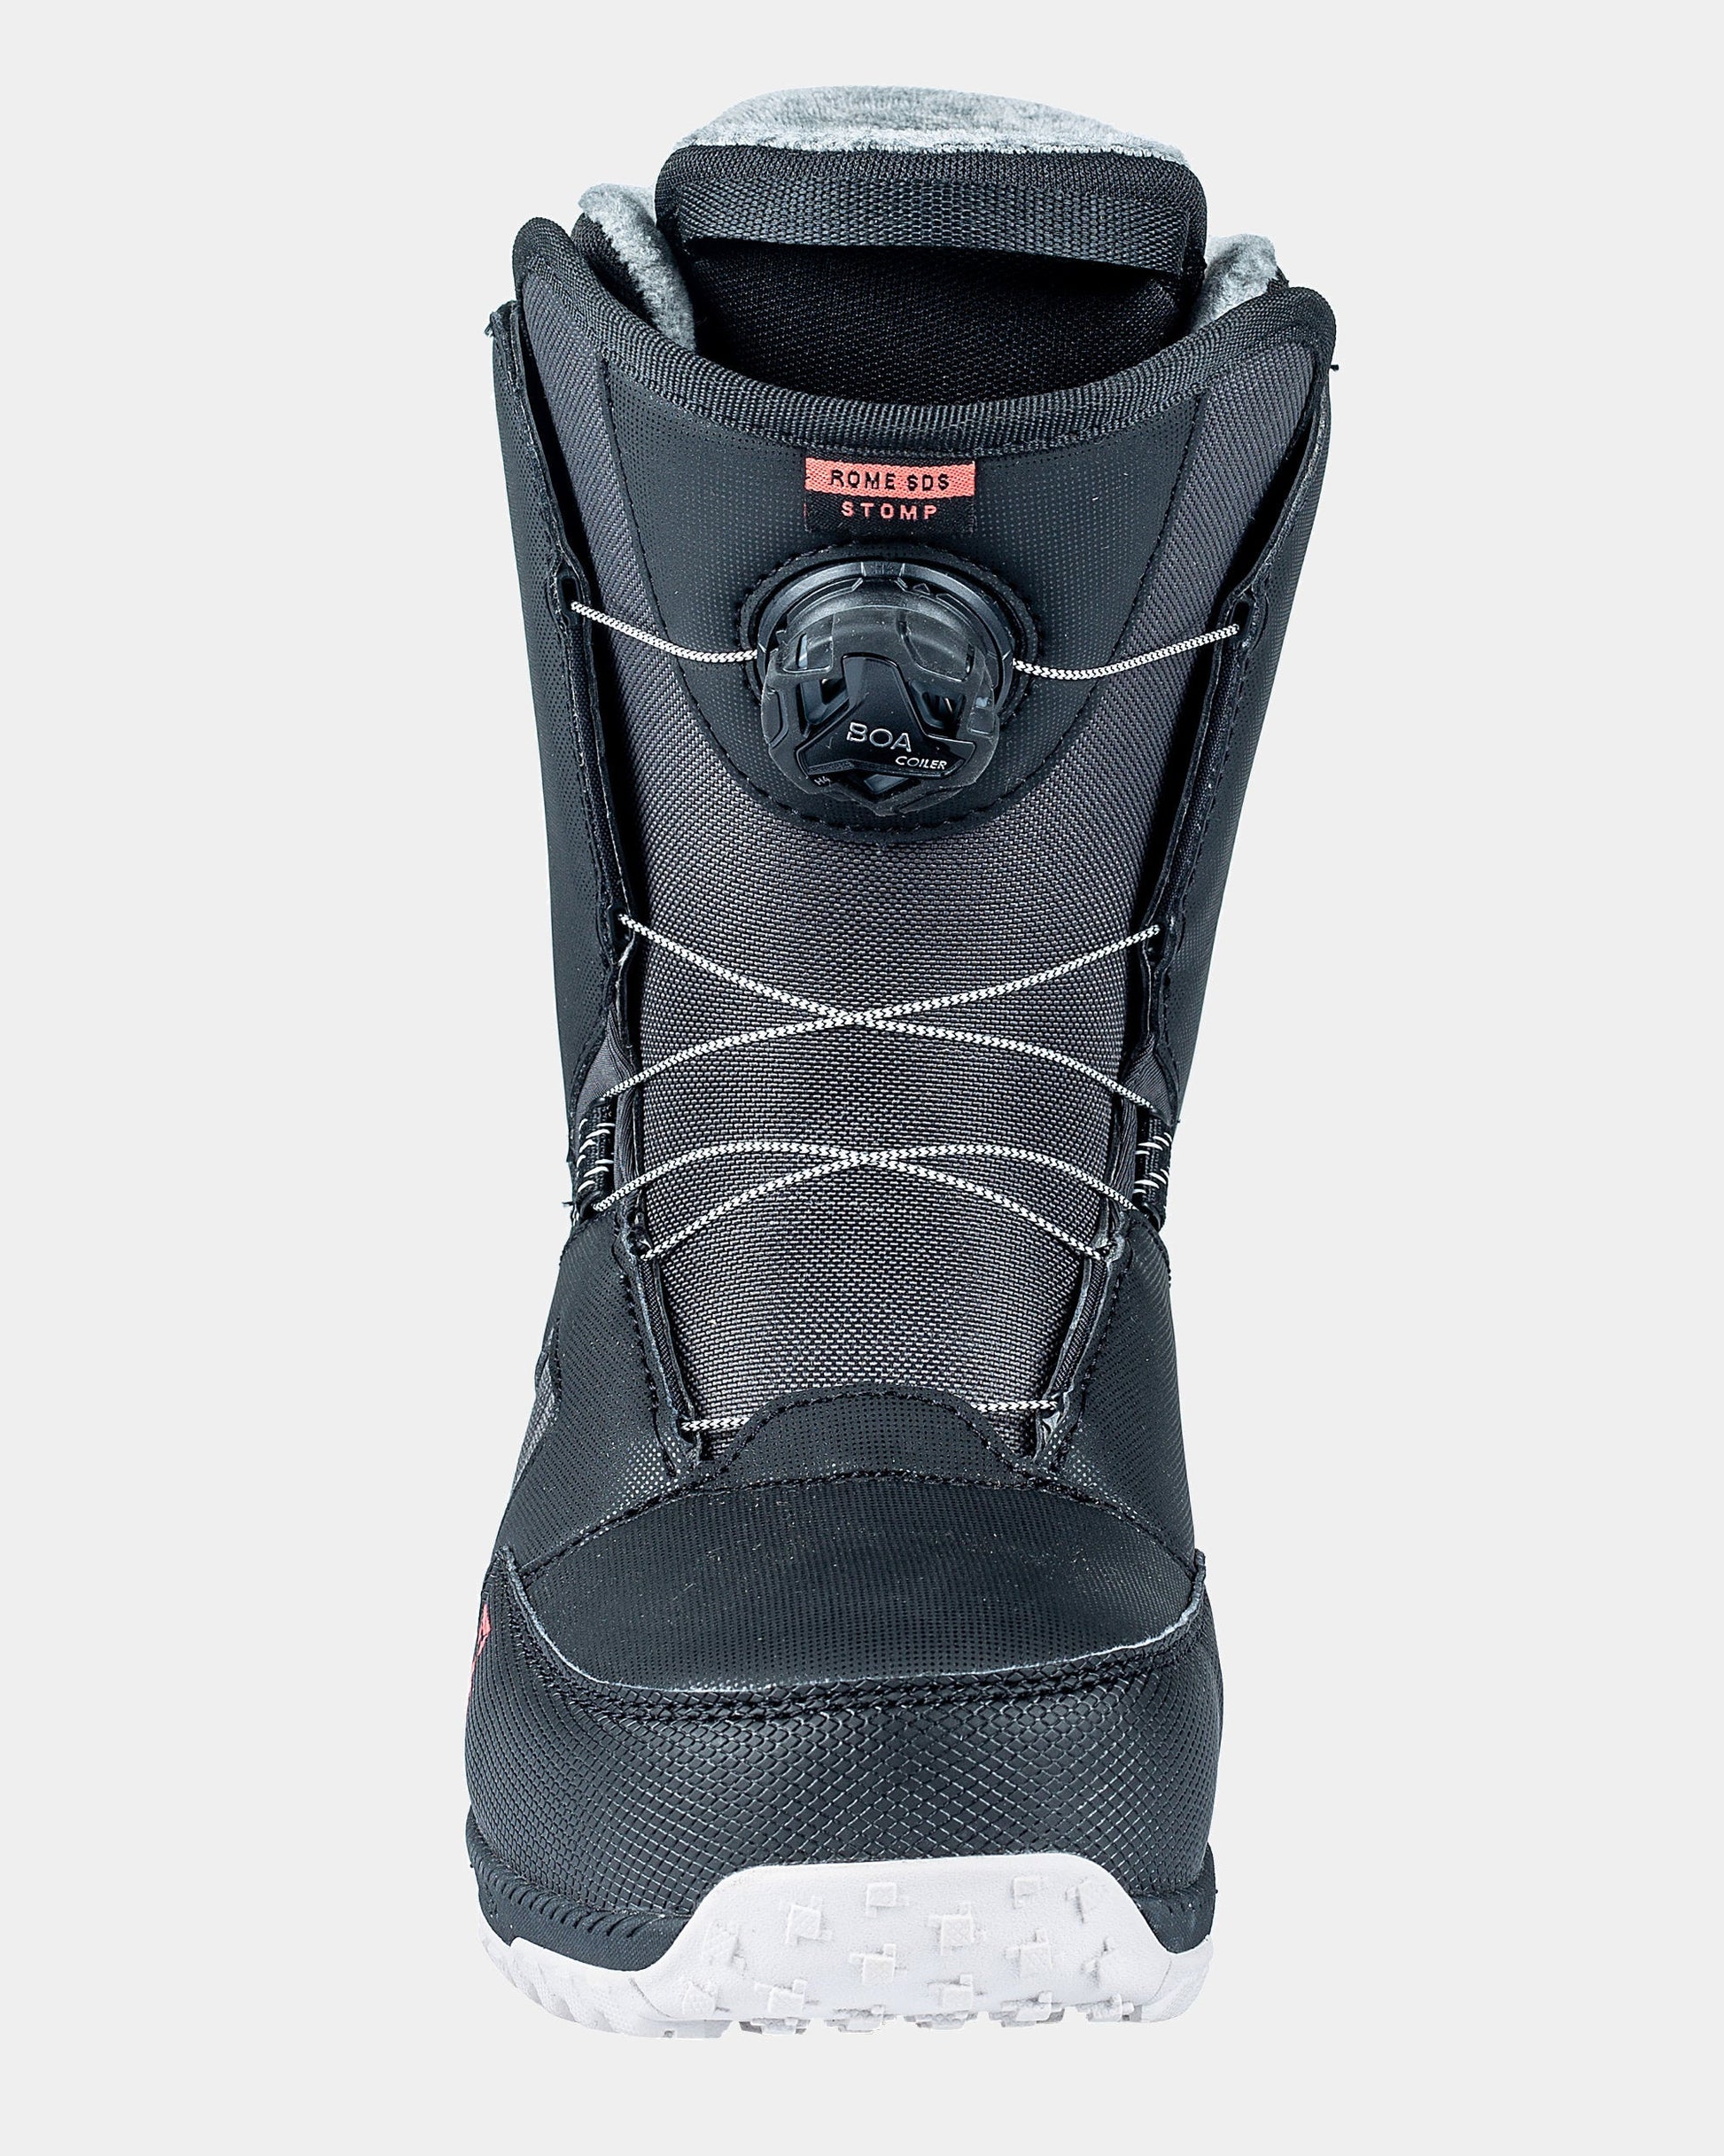 rome sds stomp boa womens 2023-2024 women snowboard boots product image